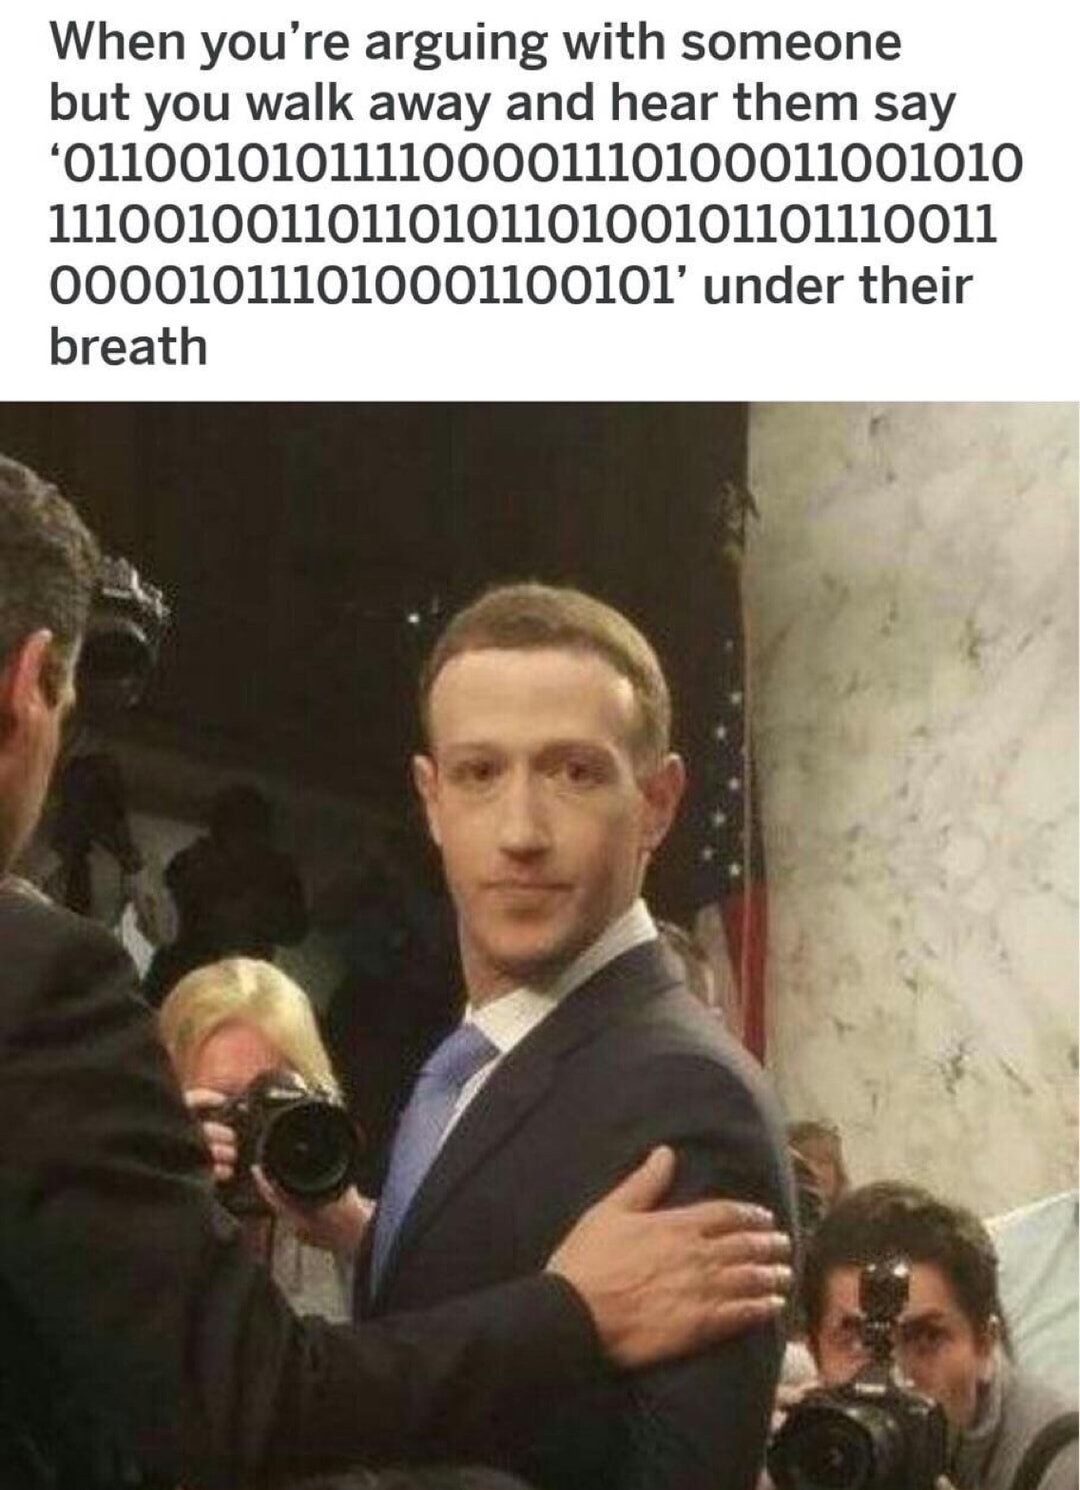 funny memes and pics - mark zuckerberg dank memes - When you're arguing with someone but you walk away and hear them say '011001010111100001110100011001010 1110010011011010110100101101110011 000010111010001100101' under their breath